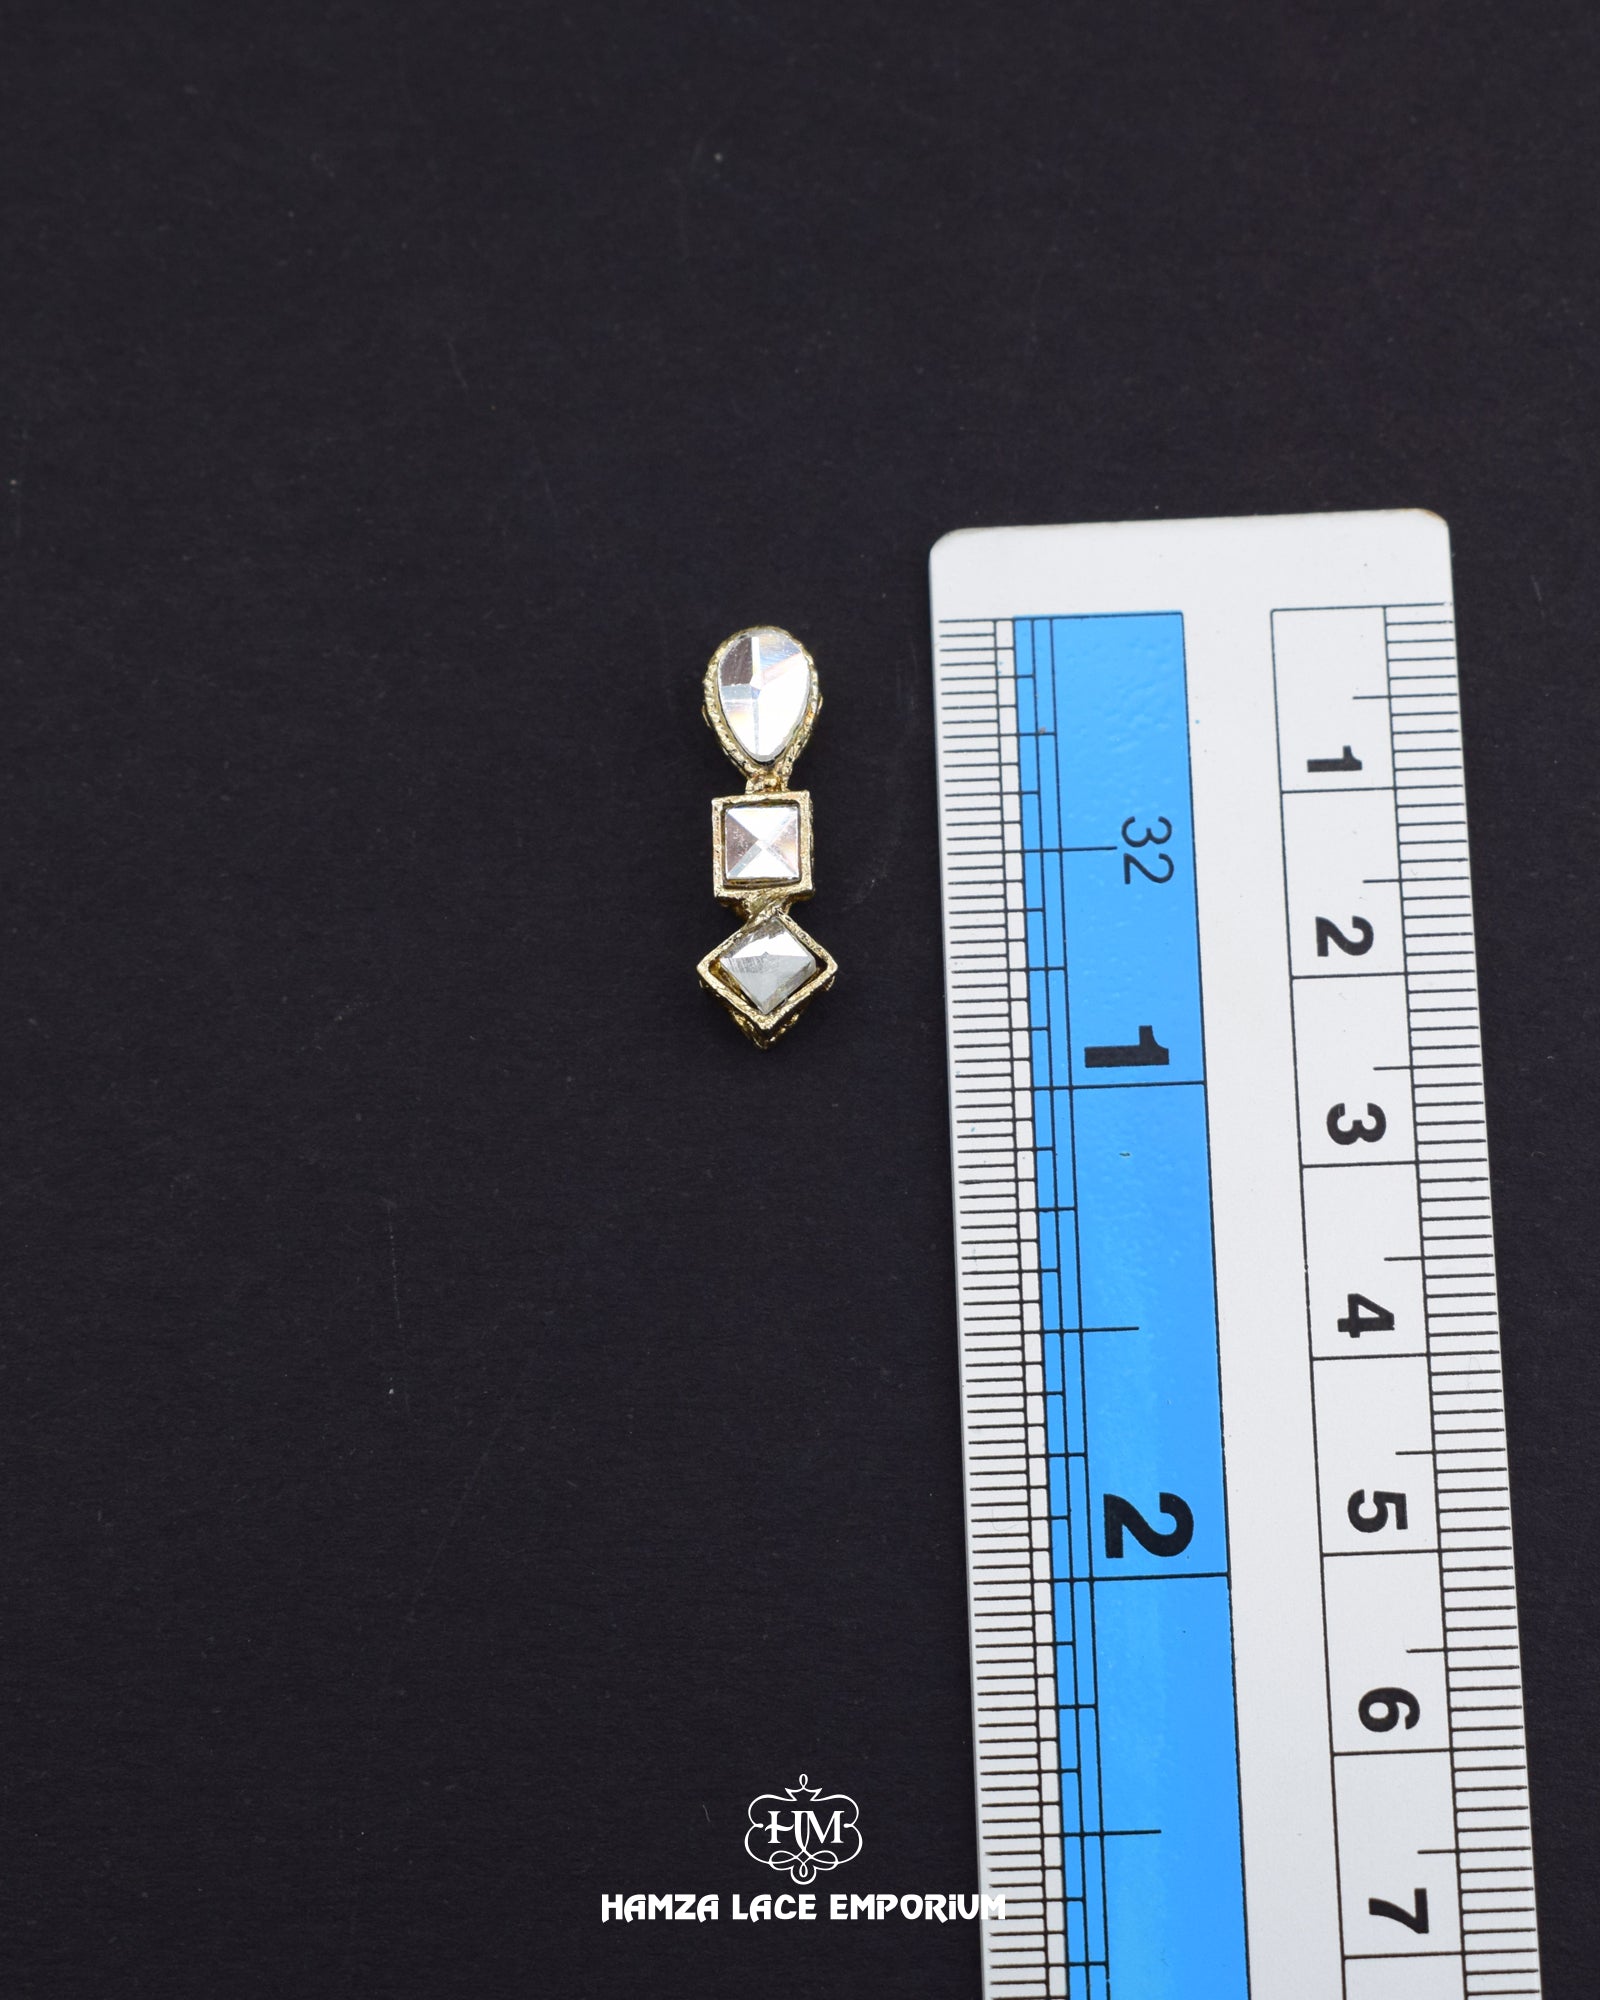 The size of the 'Hanging Button FBC018' is indicated using a ruler.